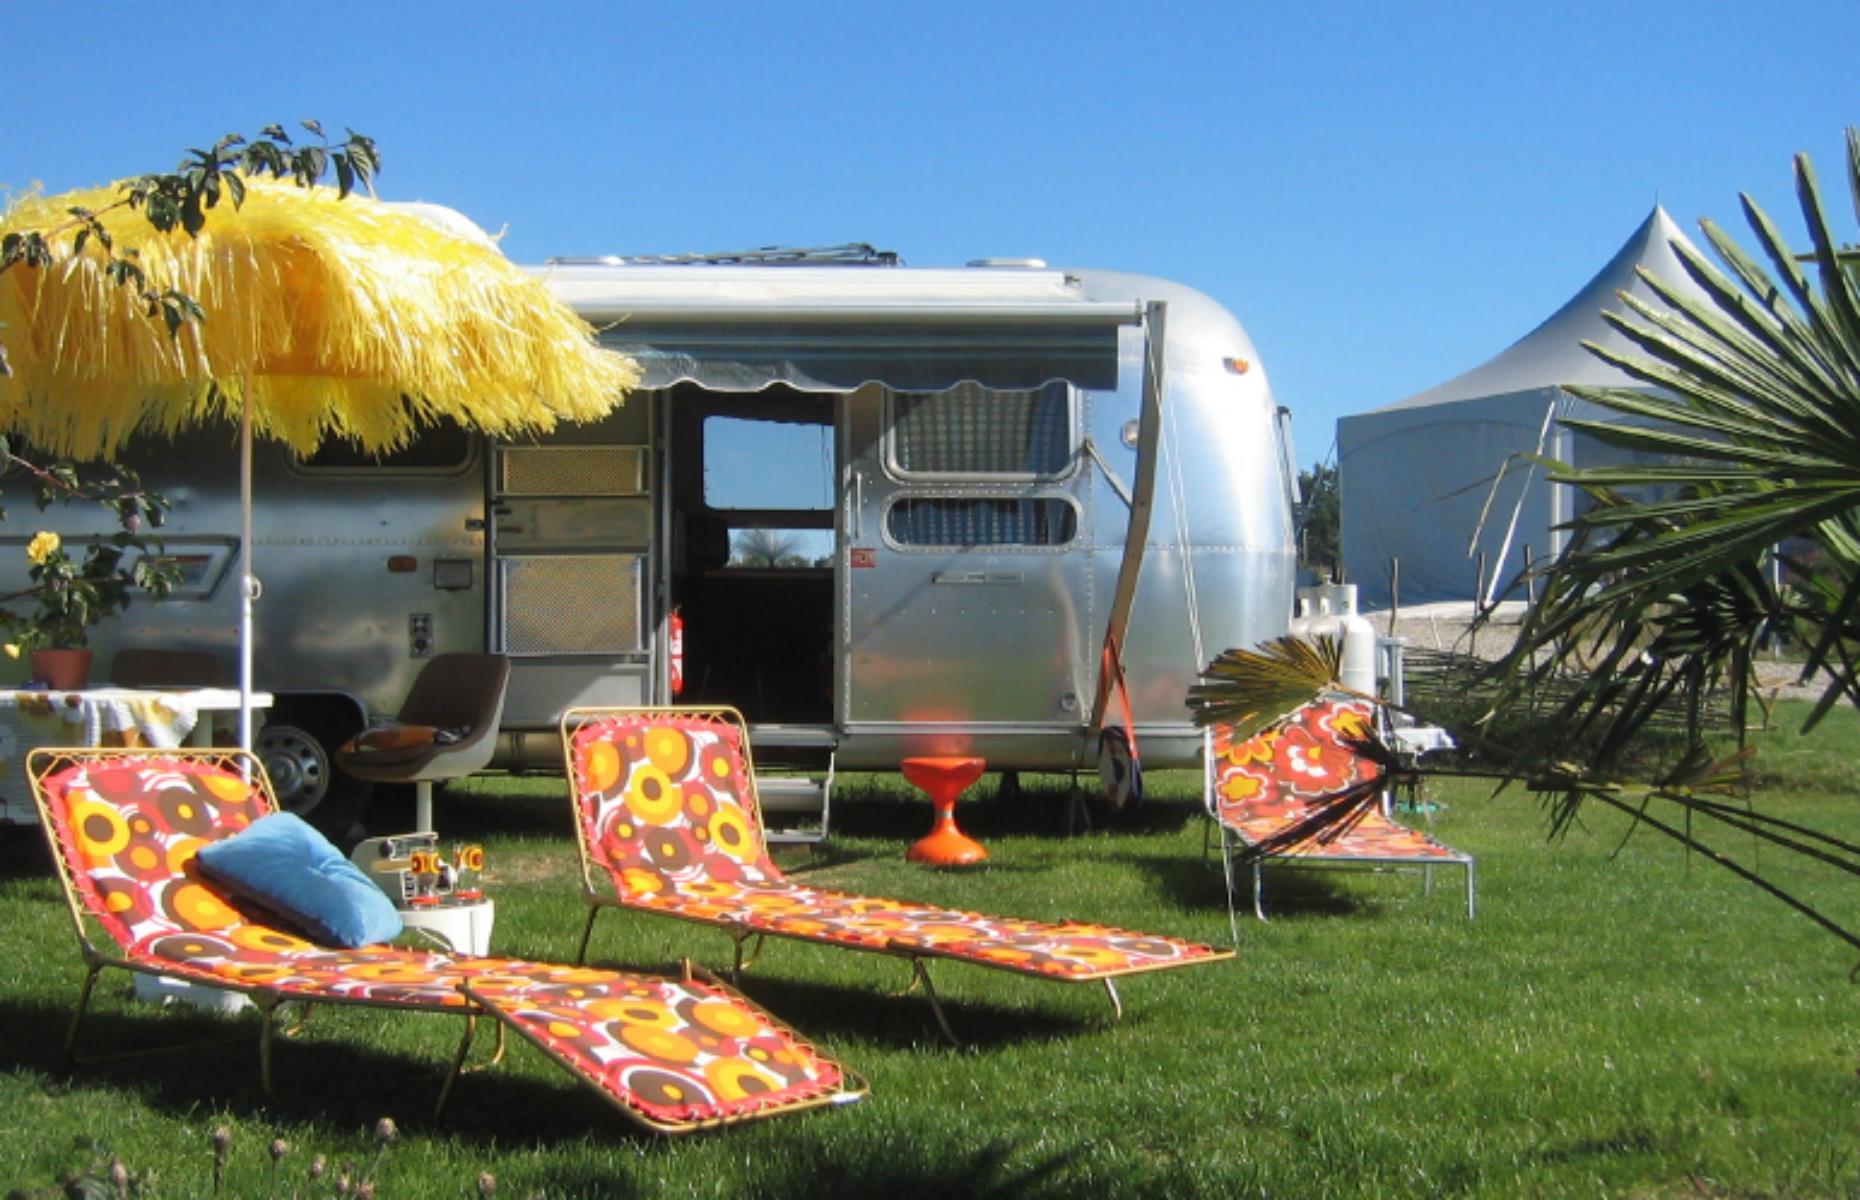 <p>Located at the foothills of the Pyrenees near Mirepoix in Ariege, this chic trailer park has 11 vintage <a href="https://glampinghub.com/france/occitanie/manses/airstream-mirepoix-france/">Airstreams</a> for hire. Each Airstream comes with its own landscaped garden plus awning, parasol and garden furniture. If that’s not enough to make you feel relaxed, you’ll also find a hot tub and relaxation yurt on site. The medieval towns of Mirepoix and Carcassonne are a short drive away.</p>